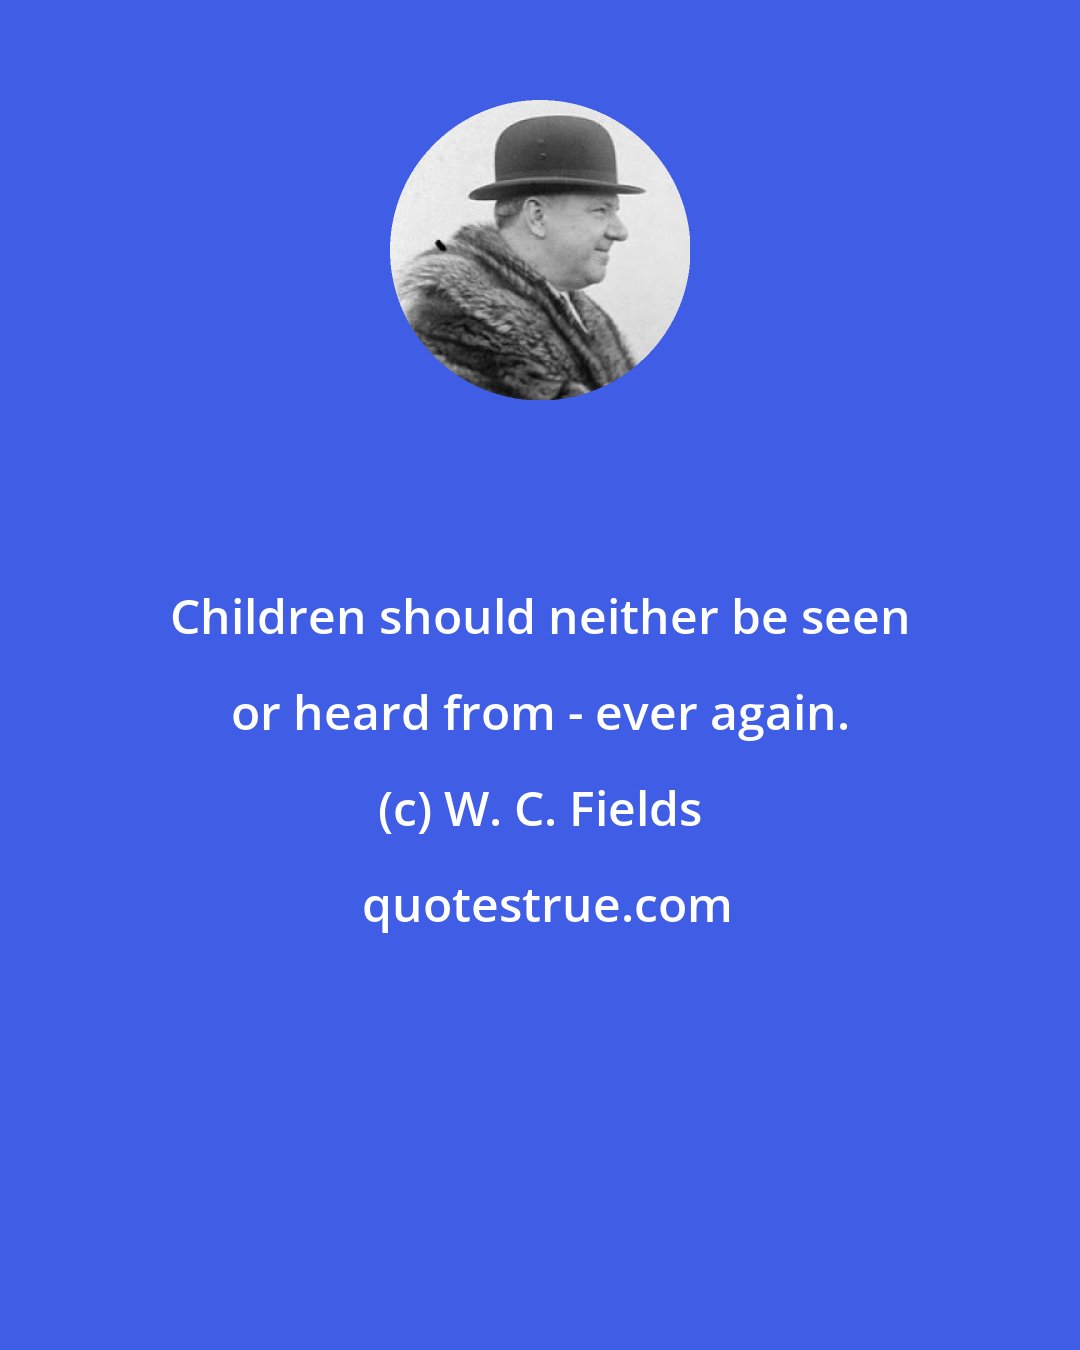 W. C. Fields: Children should neither be seen or heard from - ever again.